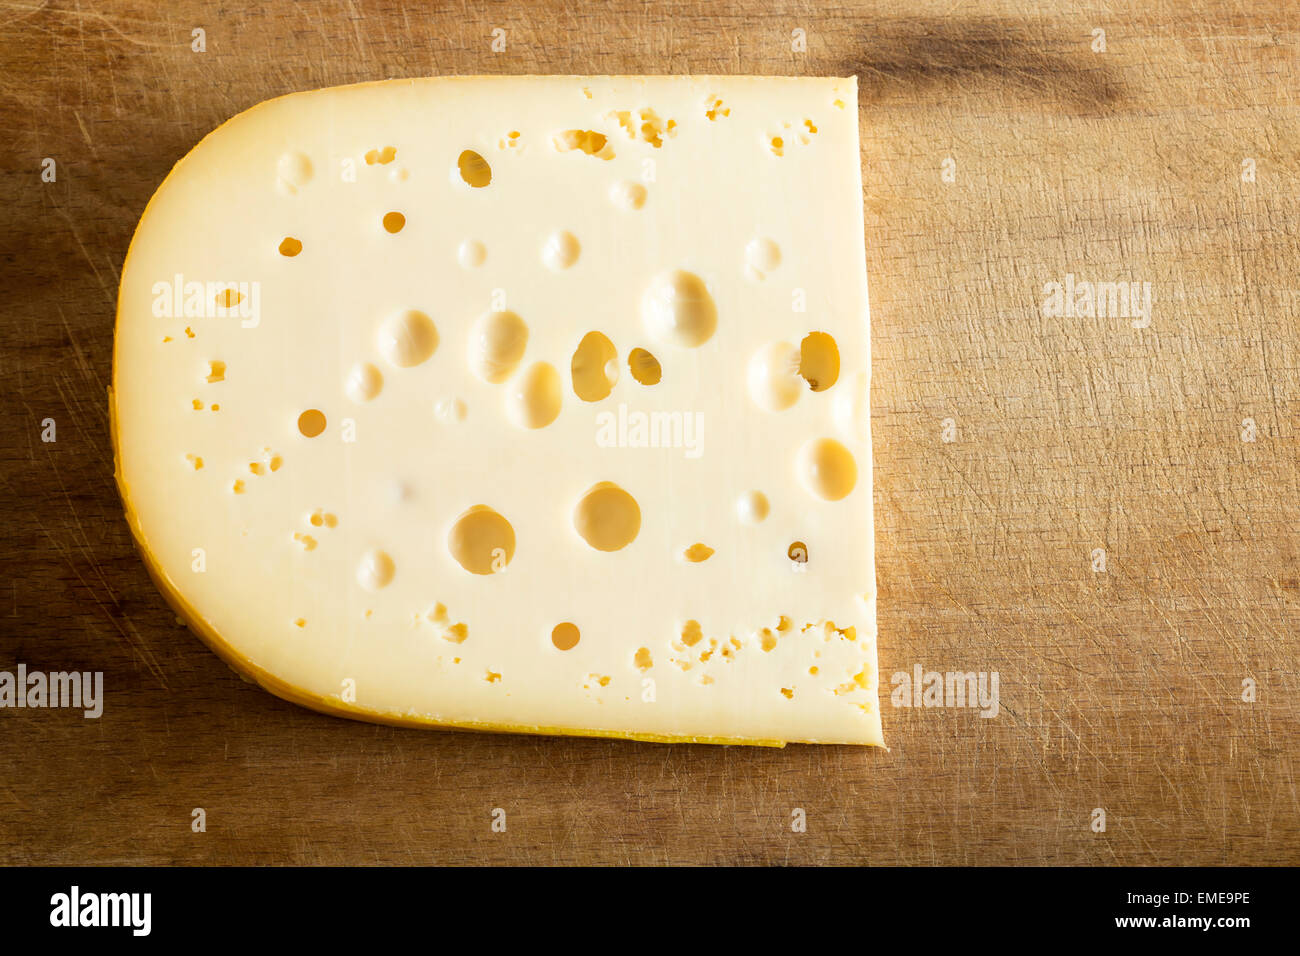 One piece of cheese over wood background Stock Photo